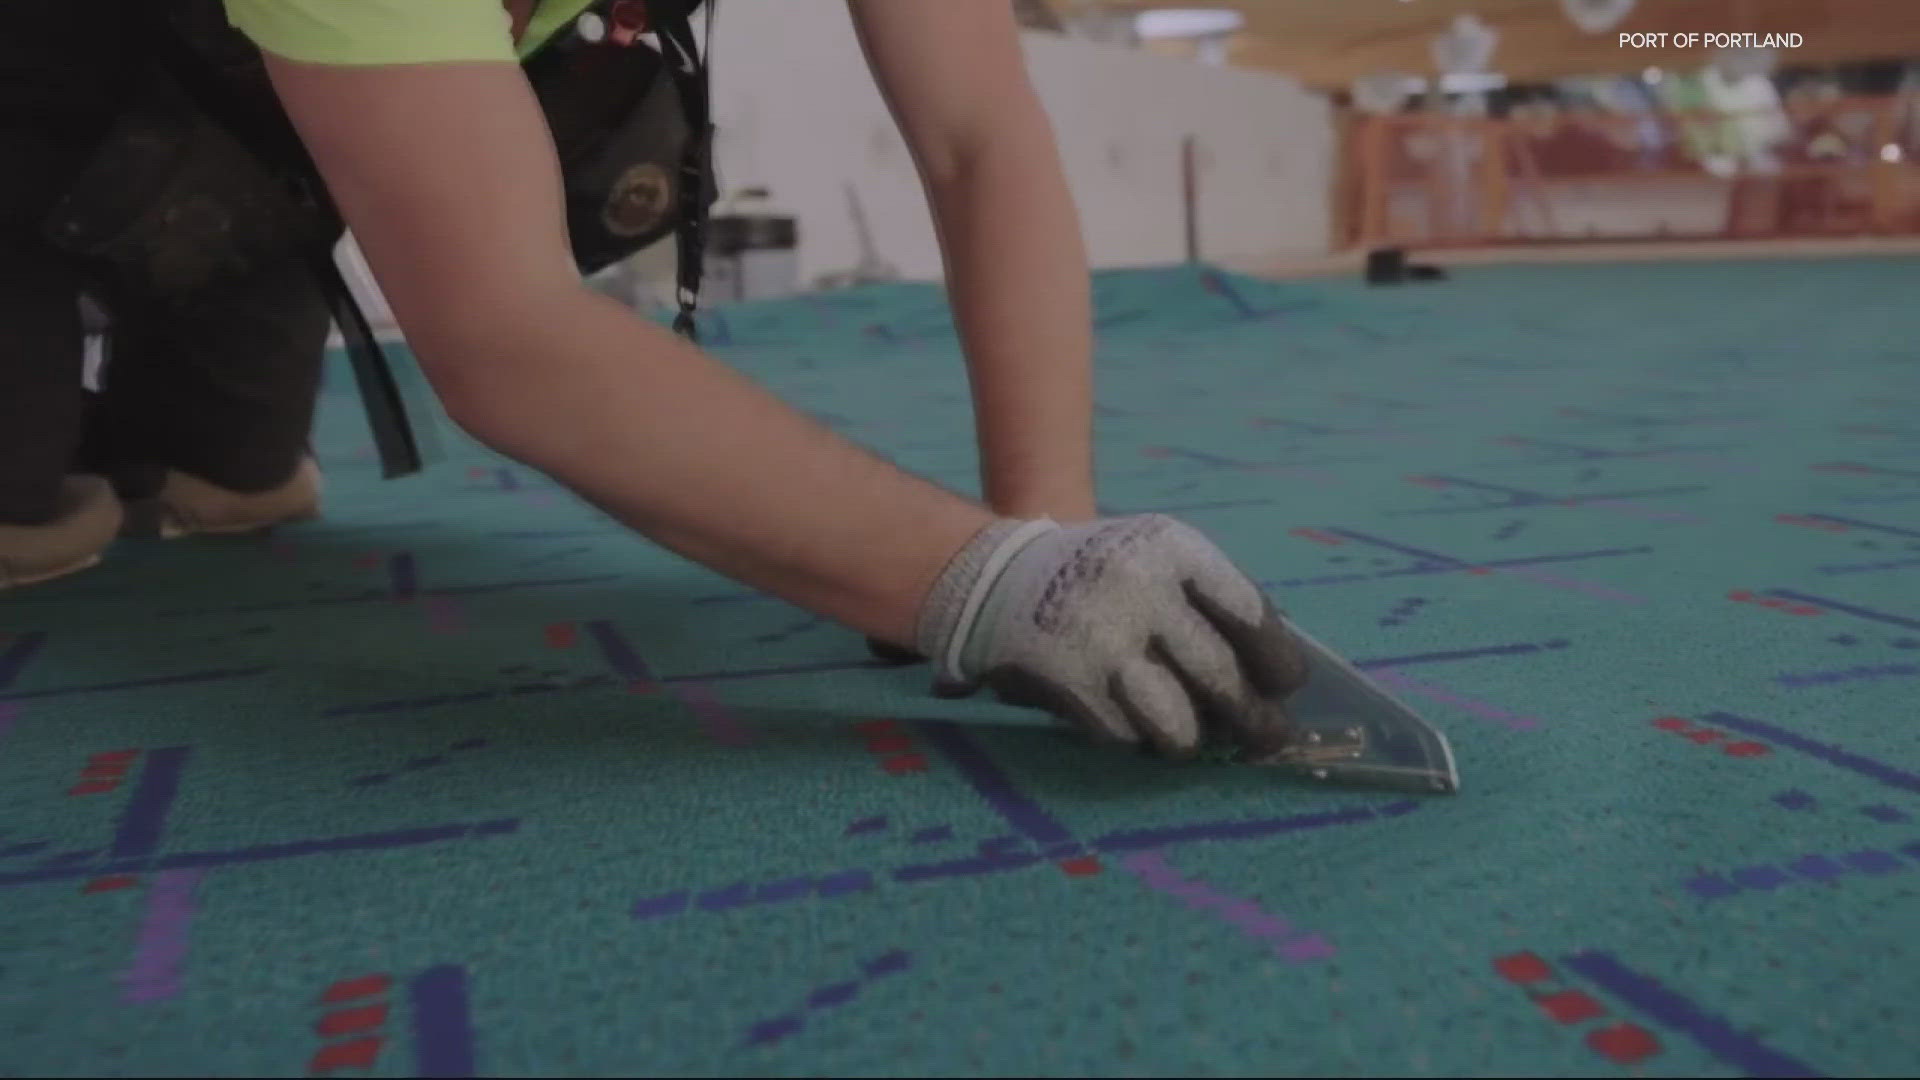 The iconic PDX teal carpet has been laid out, with the renovated main terminal is set to open in August.